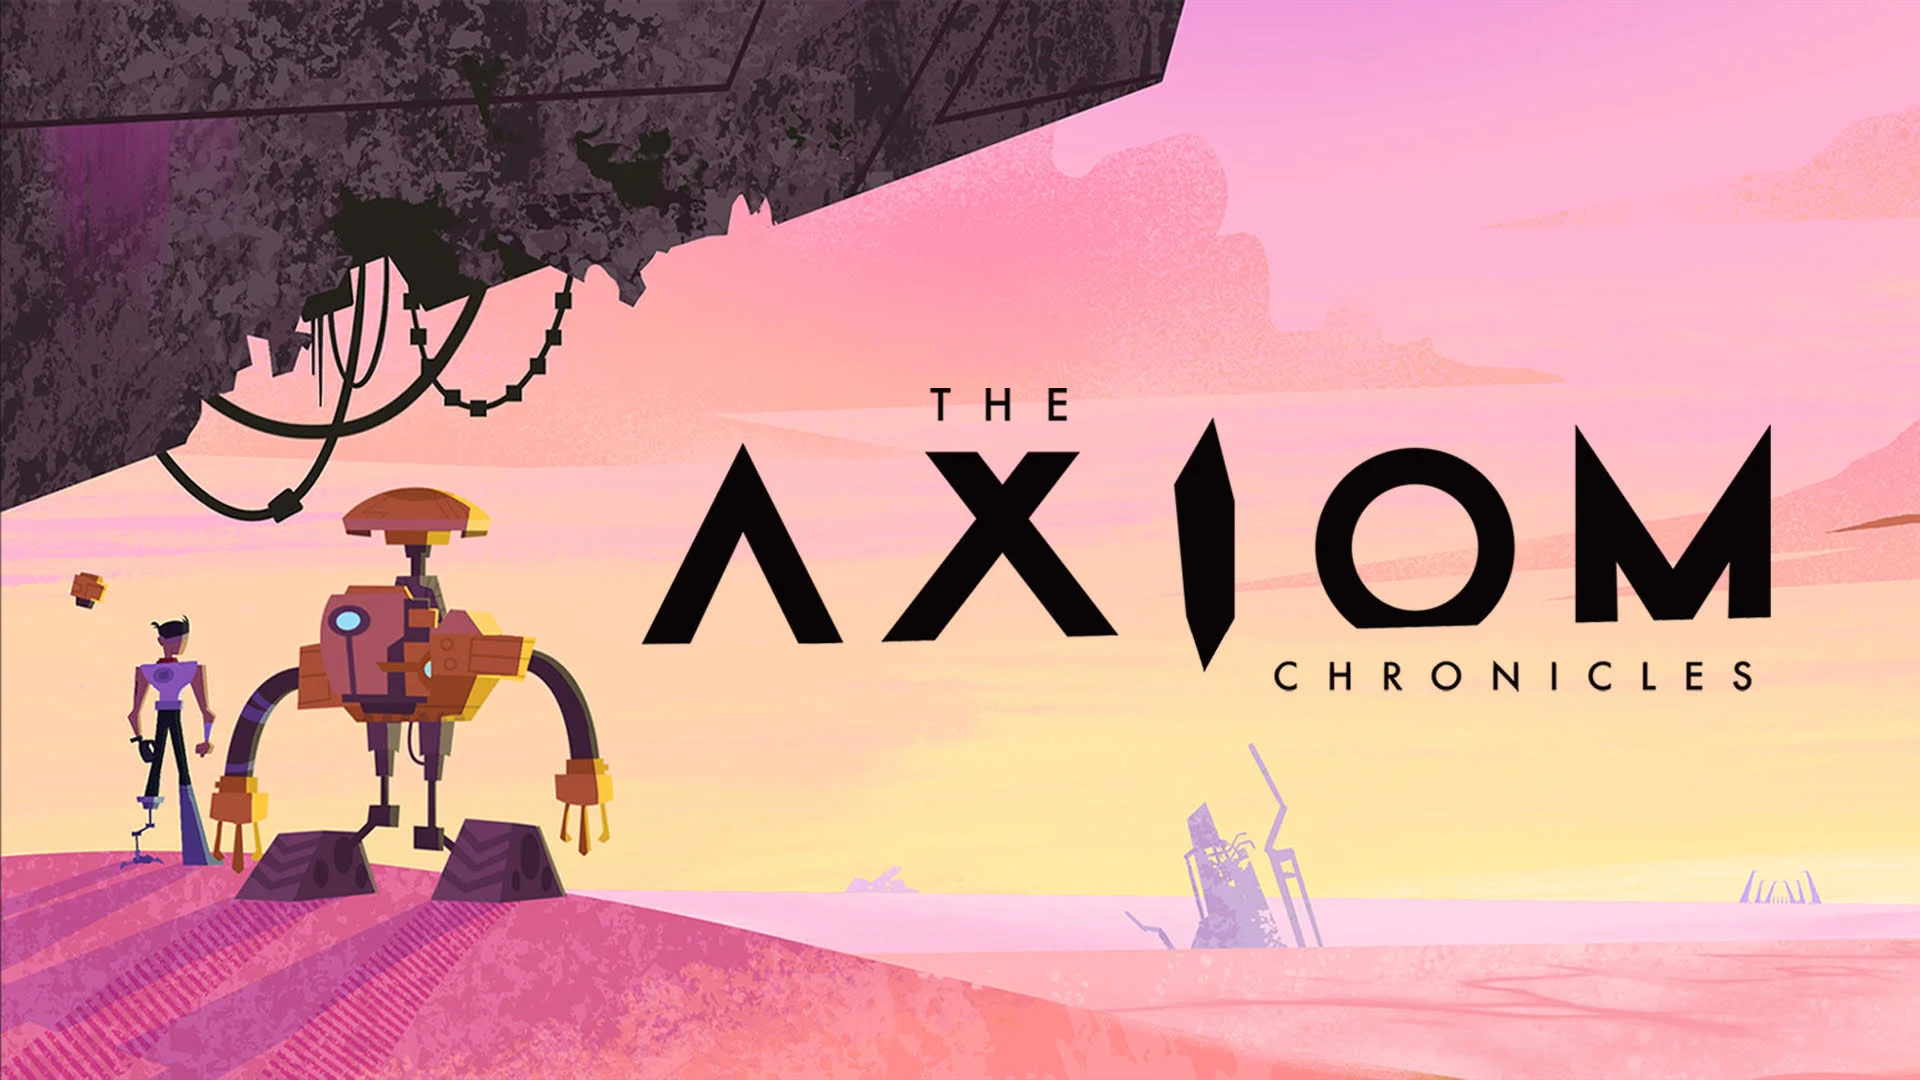 Introducing The Axiom Chronicles: A New Kids' Show Adventure